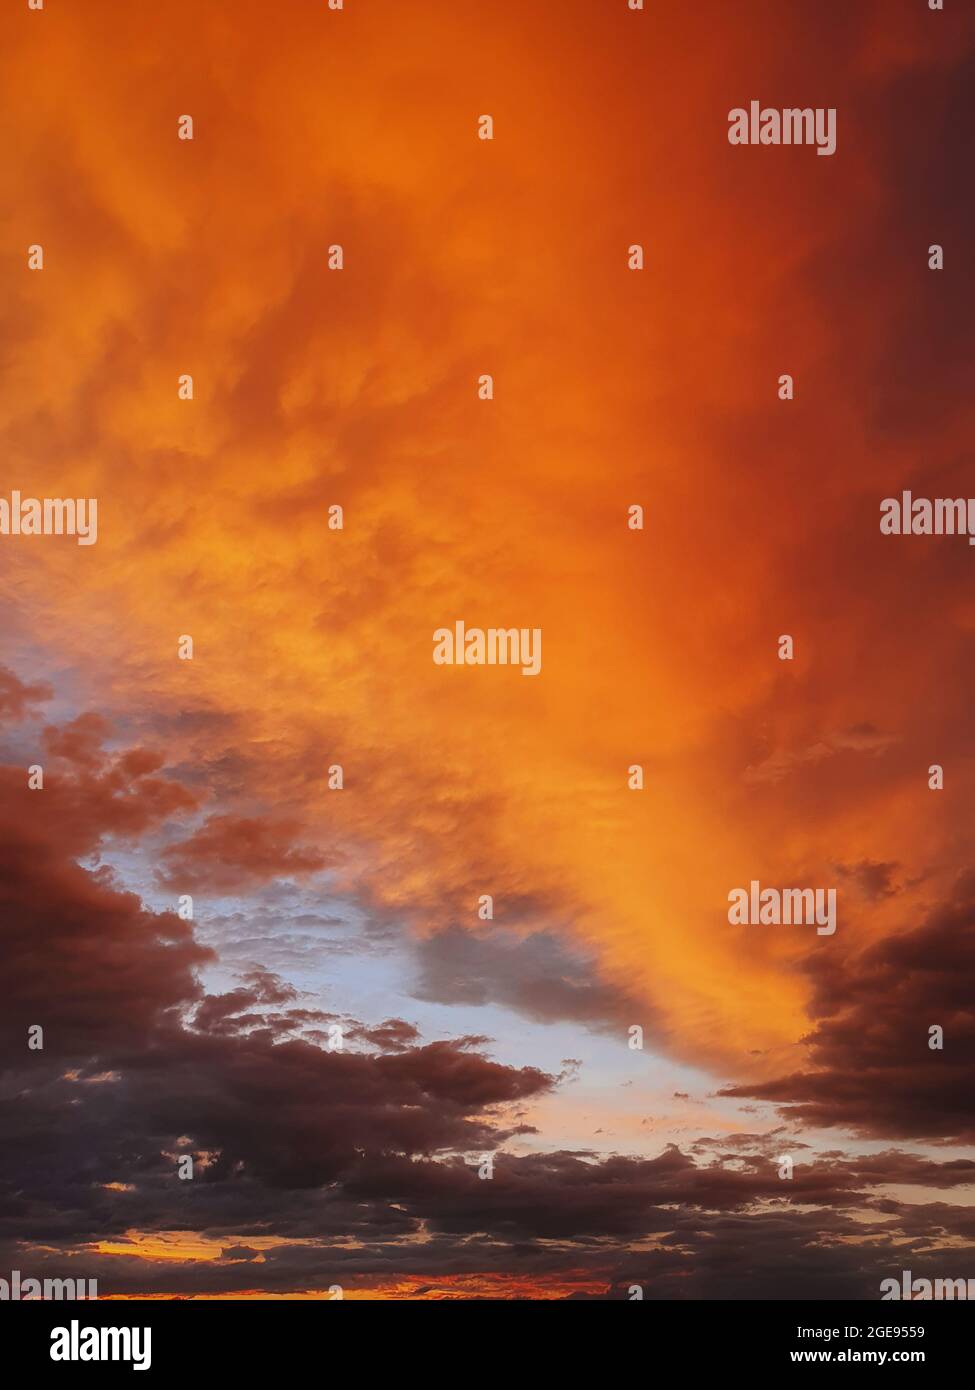 Colorful autumn sunset sky. Vertical background, abstract clouds shapes and colors. October seasonal celestial beauty. Panoramic dusk cloudscape scene Stock Photo